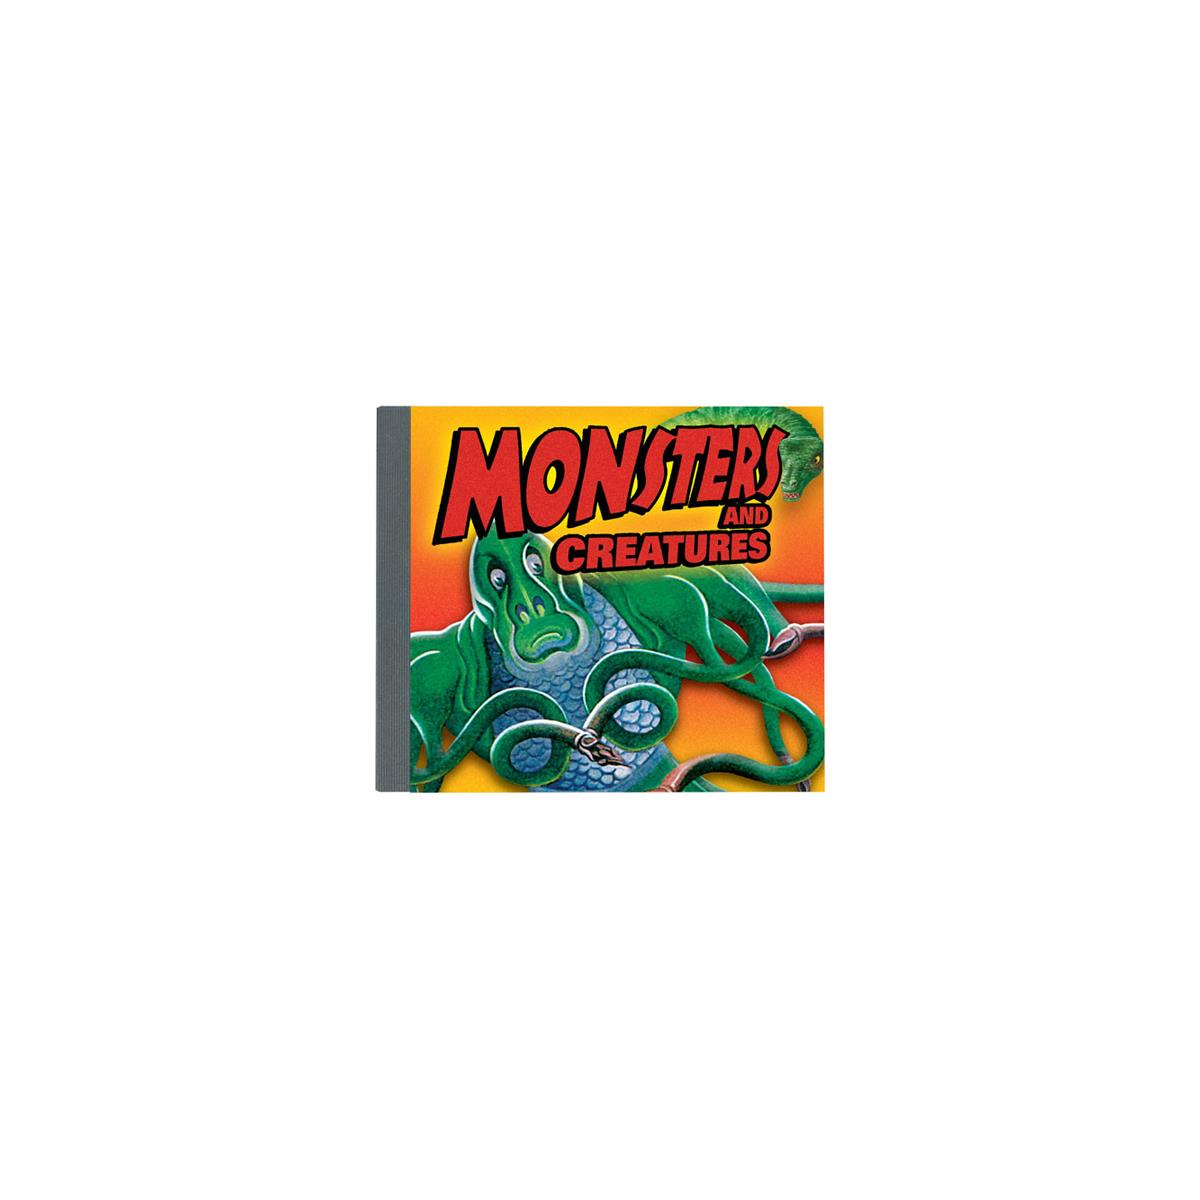 Image of Sound Ideas Monsters and Creatures Sound Effects Library Audio CD